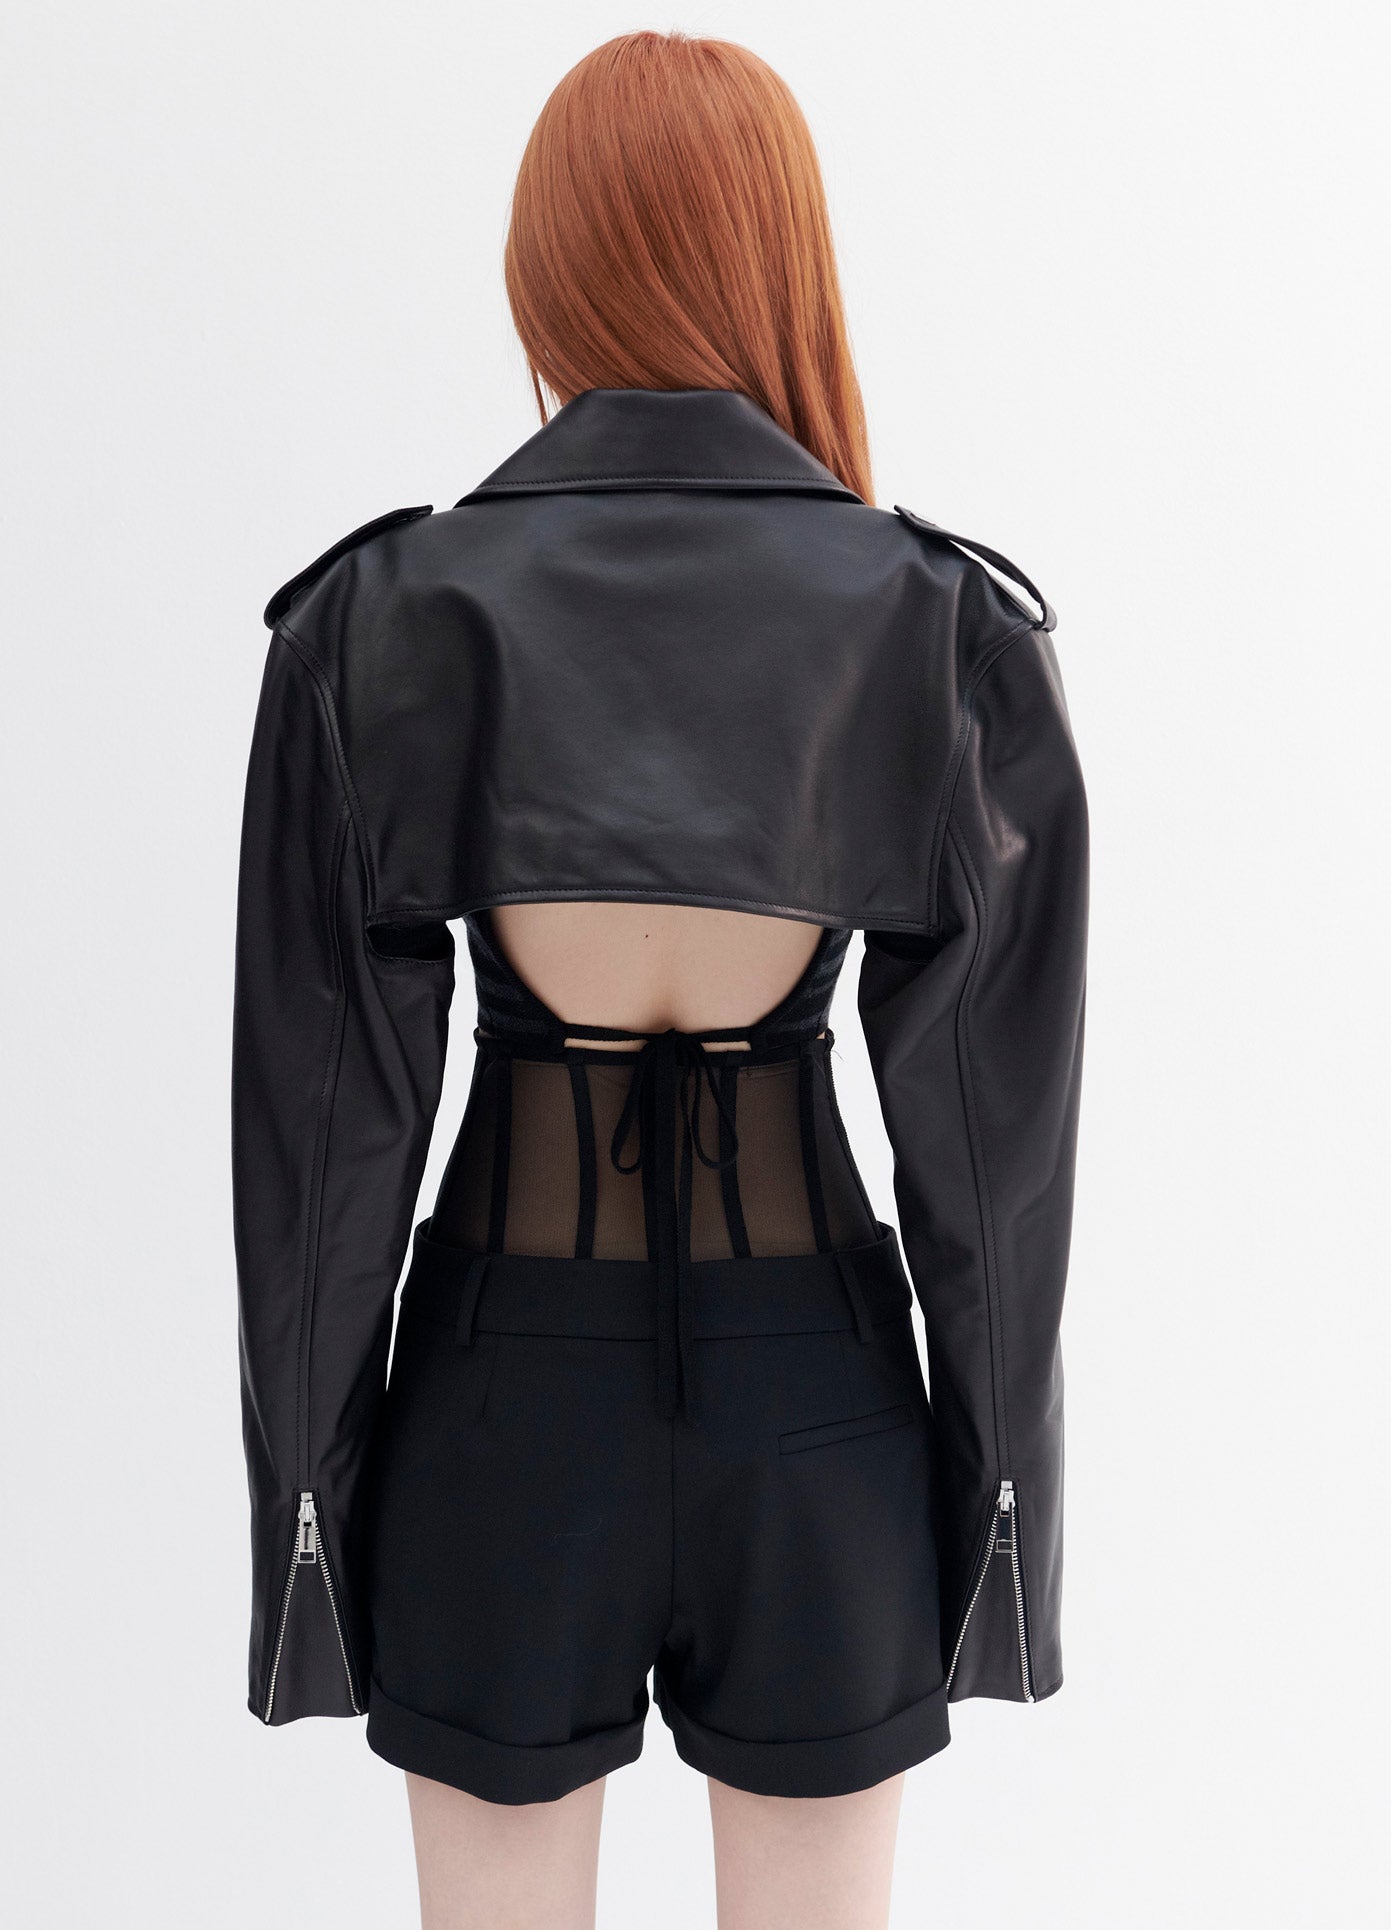 MONSE Leather Cropped Jacket in Black on Model Back View